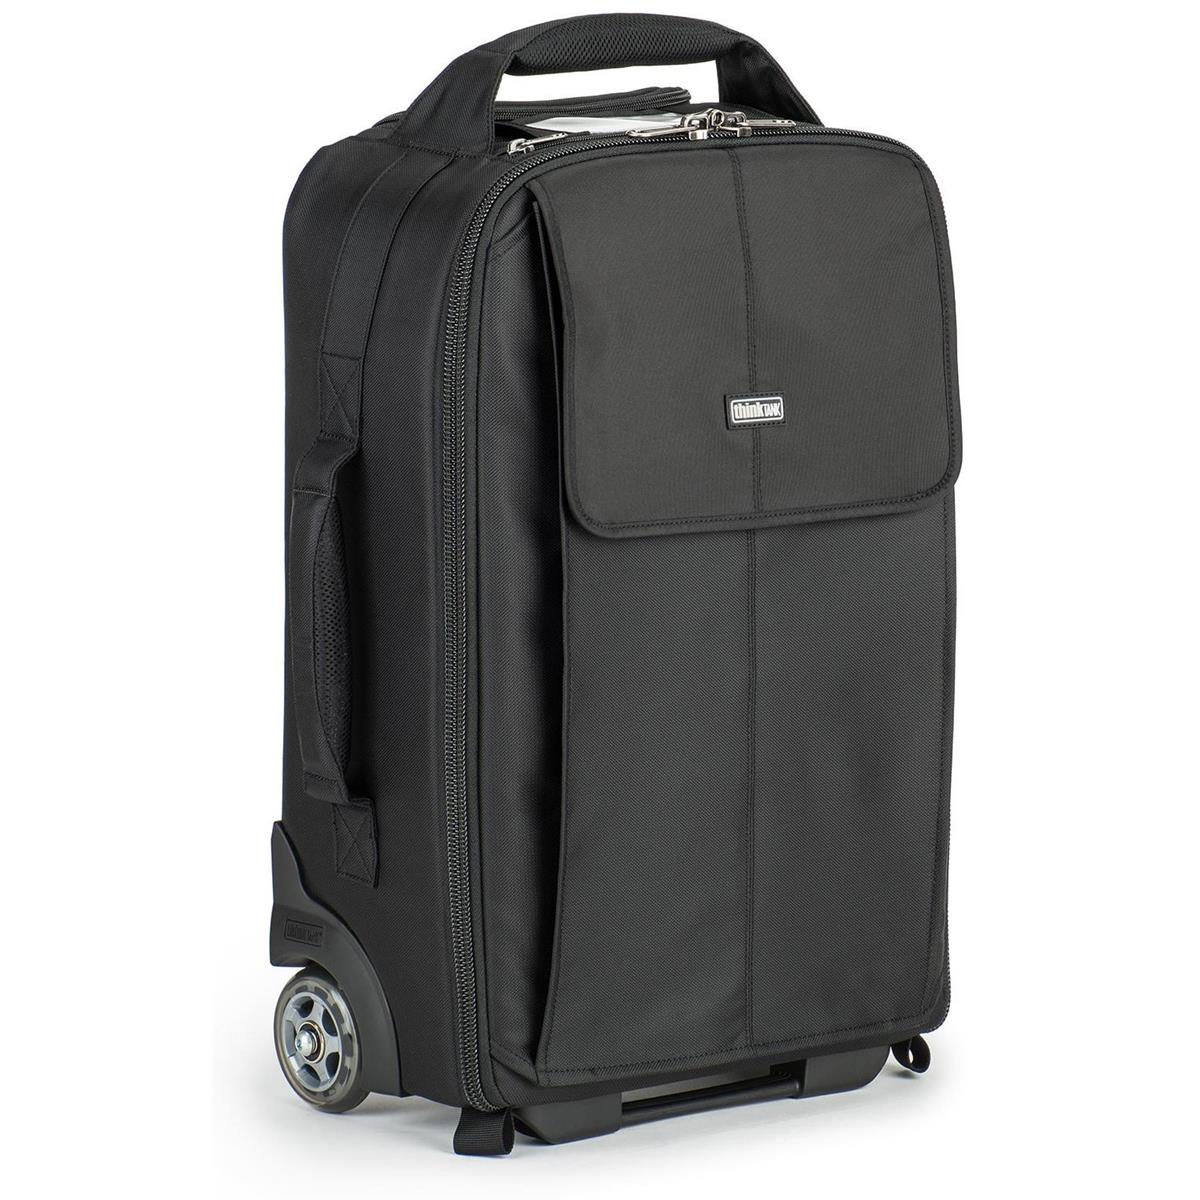 Image of Think Tank Airport Advantage Carry-On Roller Bag